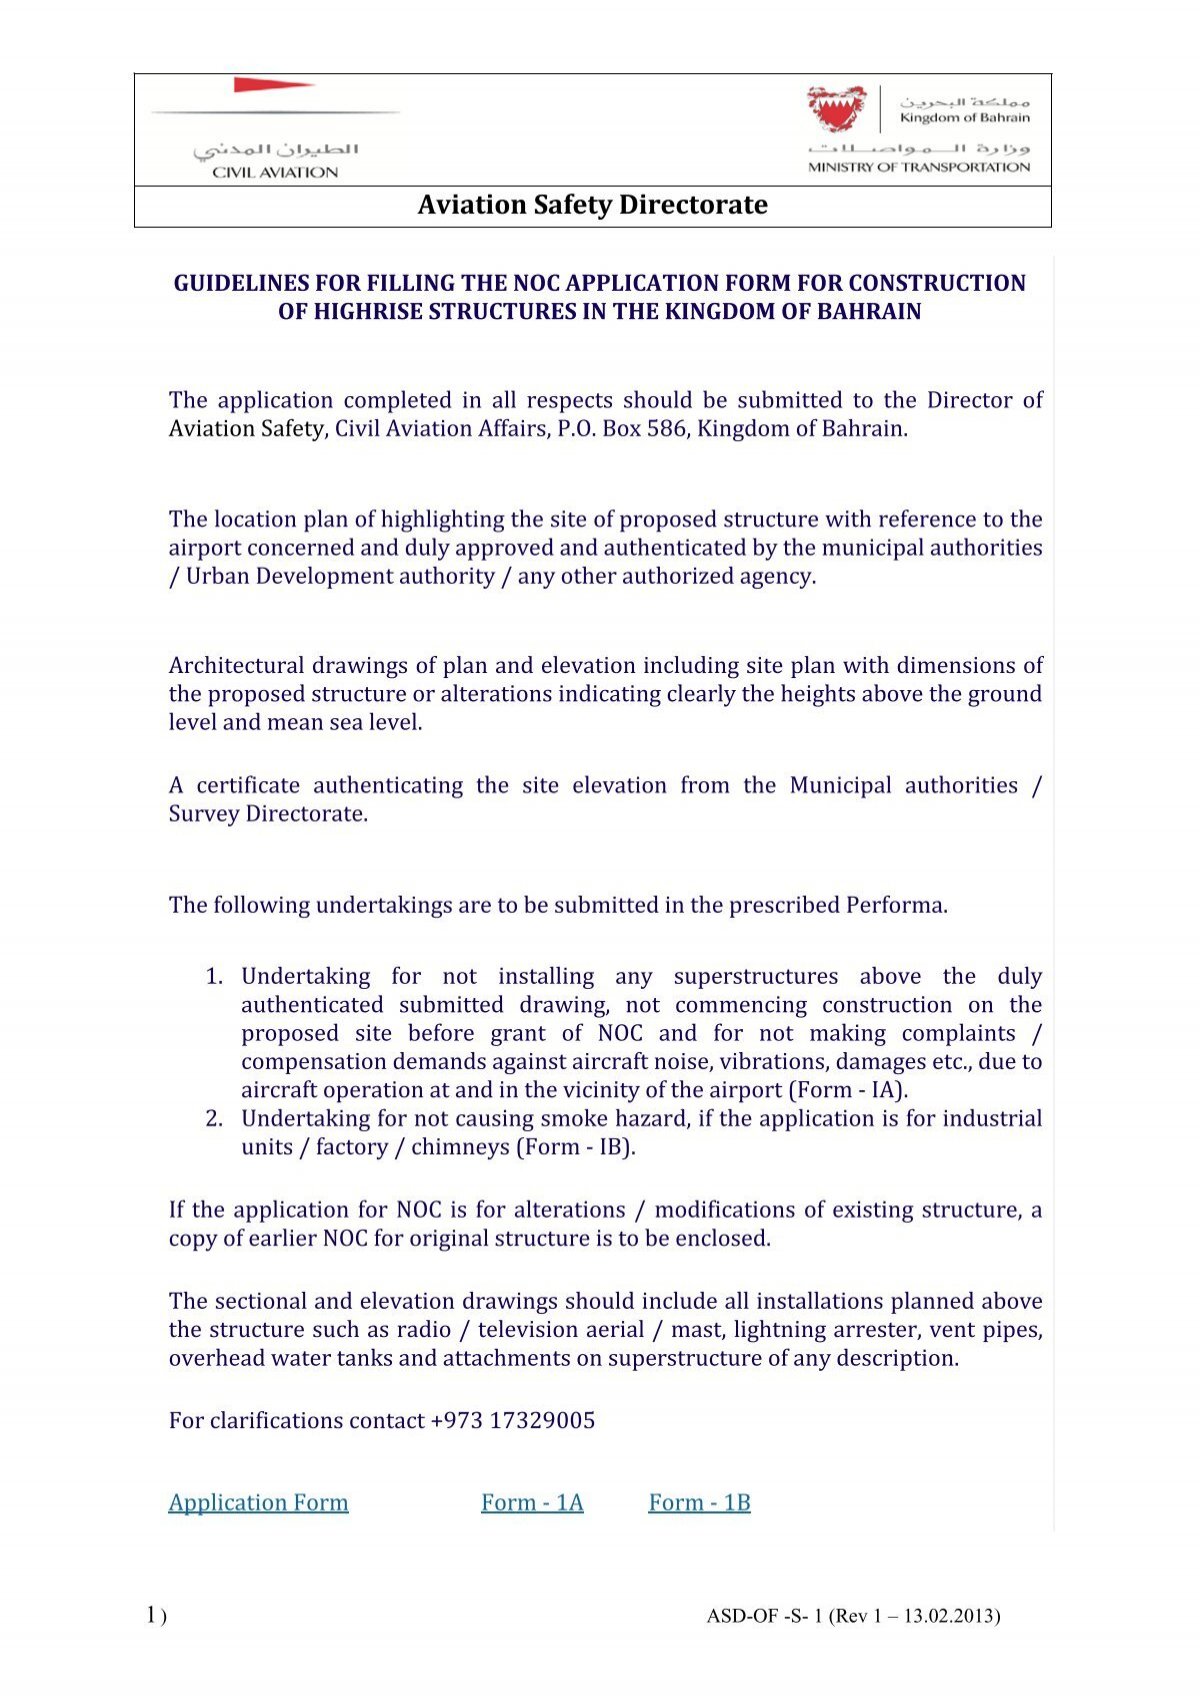 guidelines-for-filling-the-noc-application-form-for-construction-of